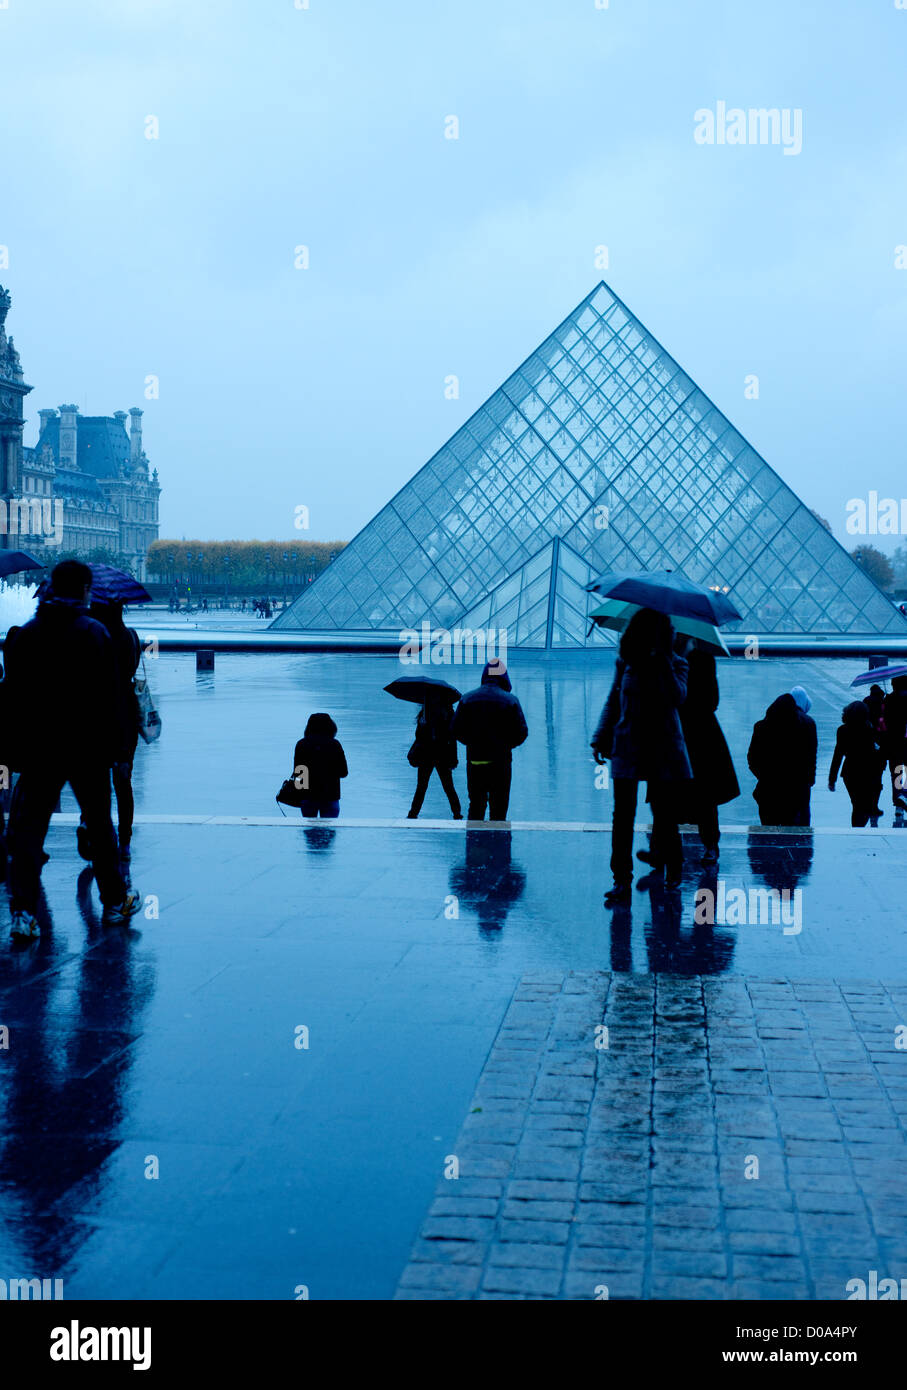 The Louvre pyramid on a wet autumn evening with people rushing home Stock Photo